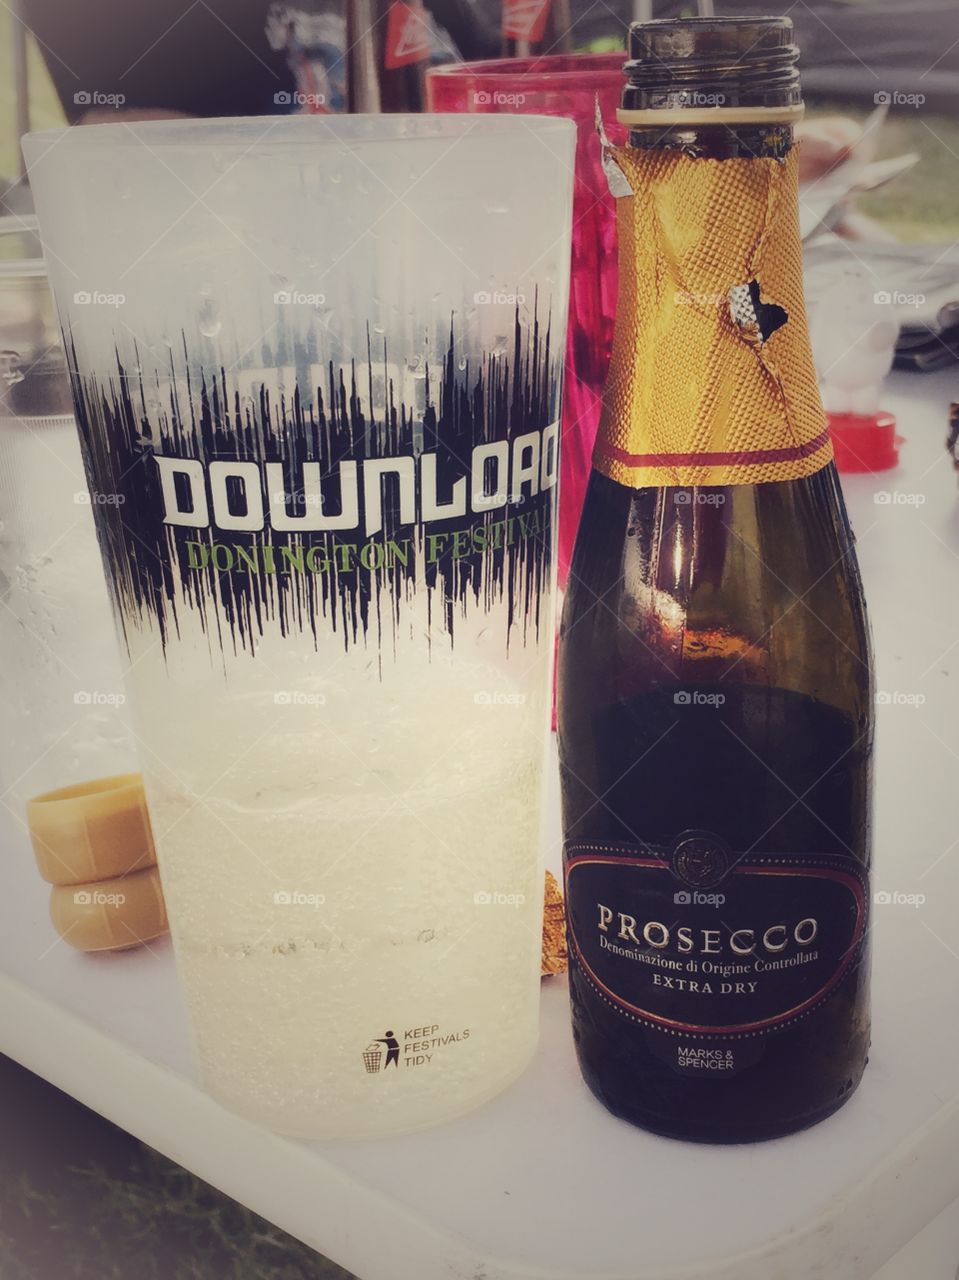 A bottle of prosecco next to a recyclable cup at Download festival Donnington England 